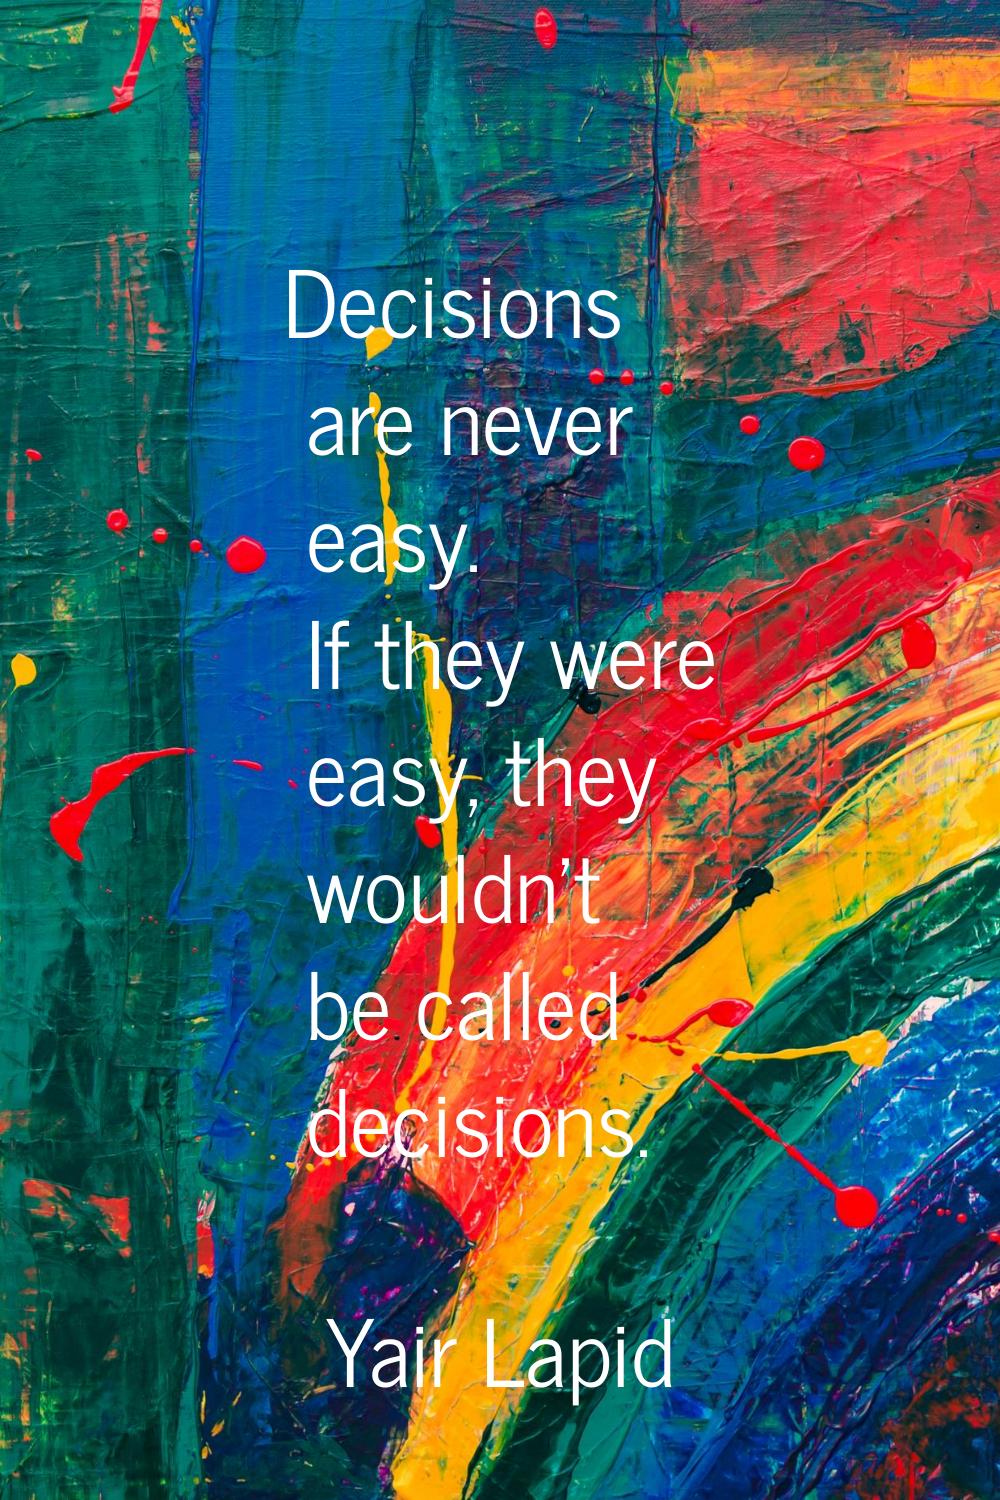 Decisions are never easy. If they were easy, they wouldn't be called decisions.